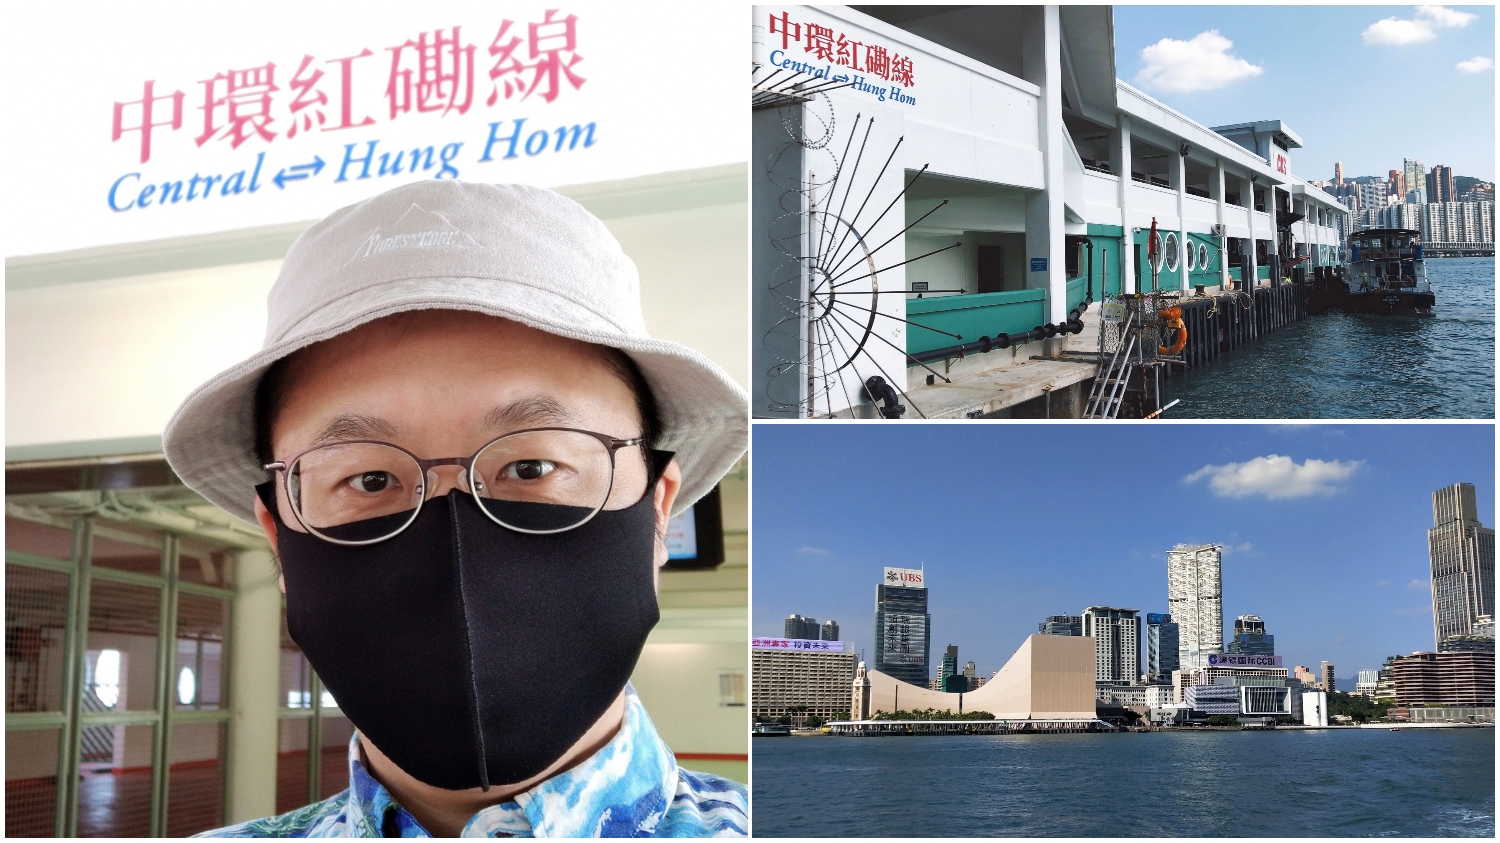 Let's TIY, tour the Hung Hom to Central ferry ride yourself